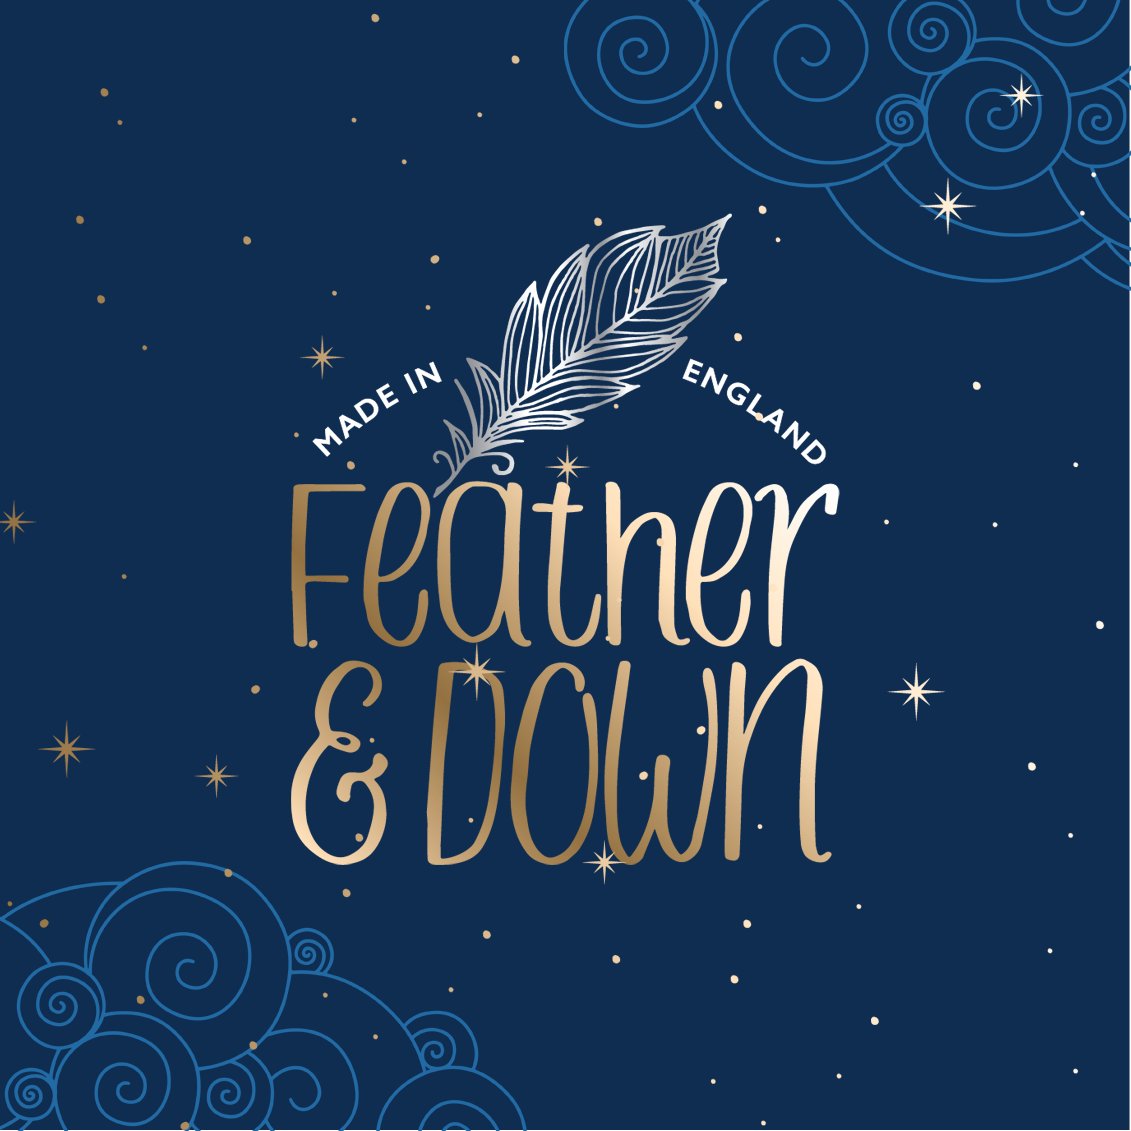 Feather & Down encourages relaxation and a state of wellbeing to help aid sleep. Made in England. Available now exclusively in Boots stores and at https://t.co/XN0cC92mQY